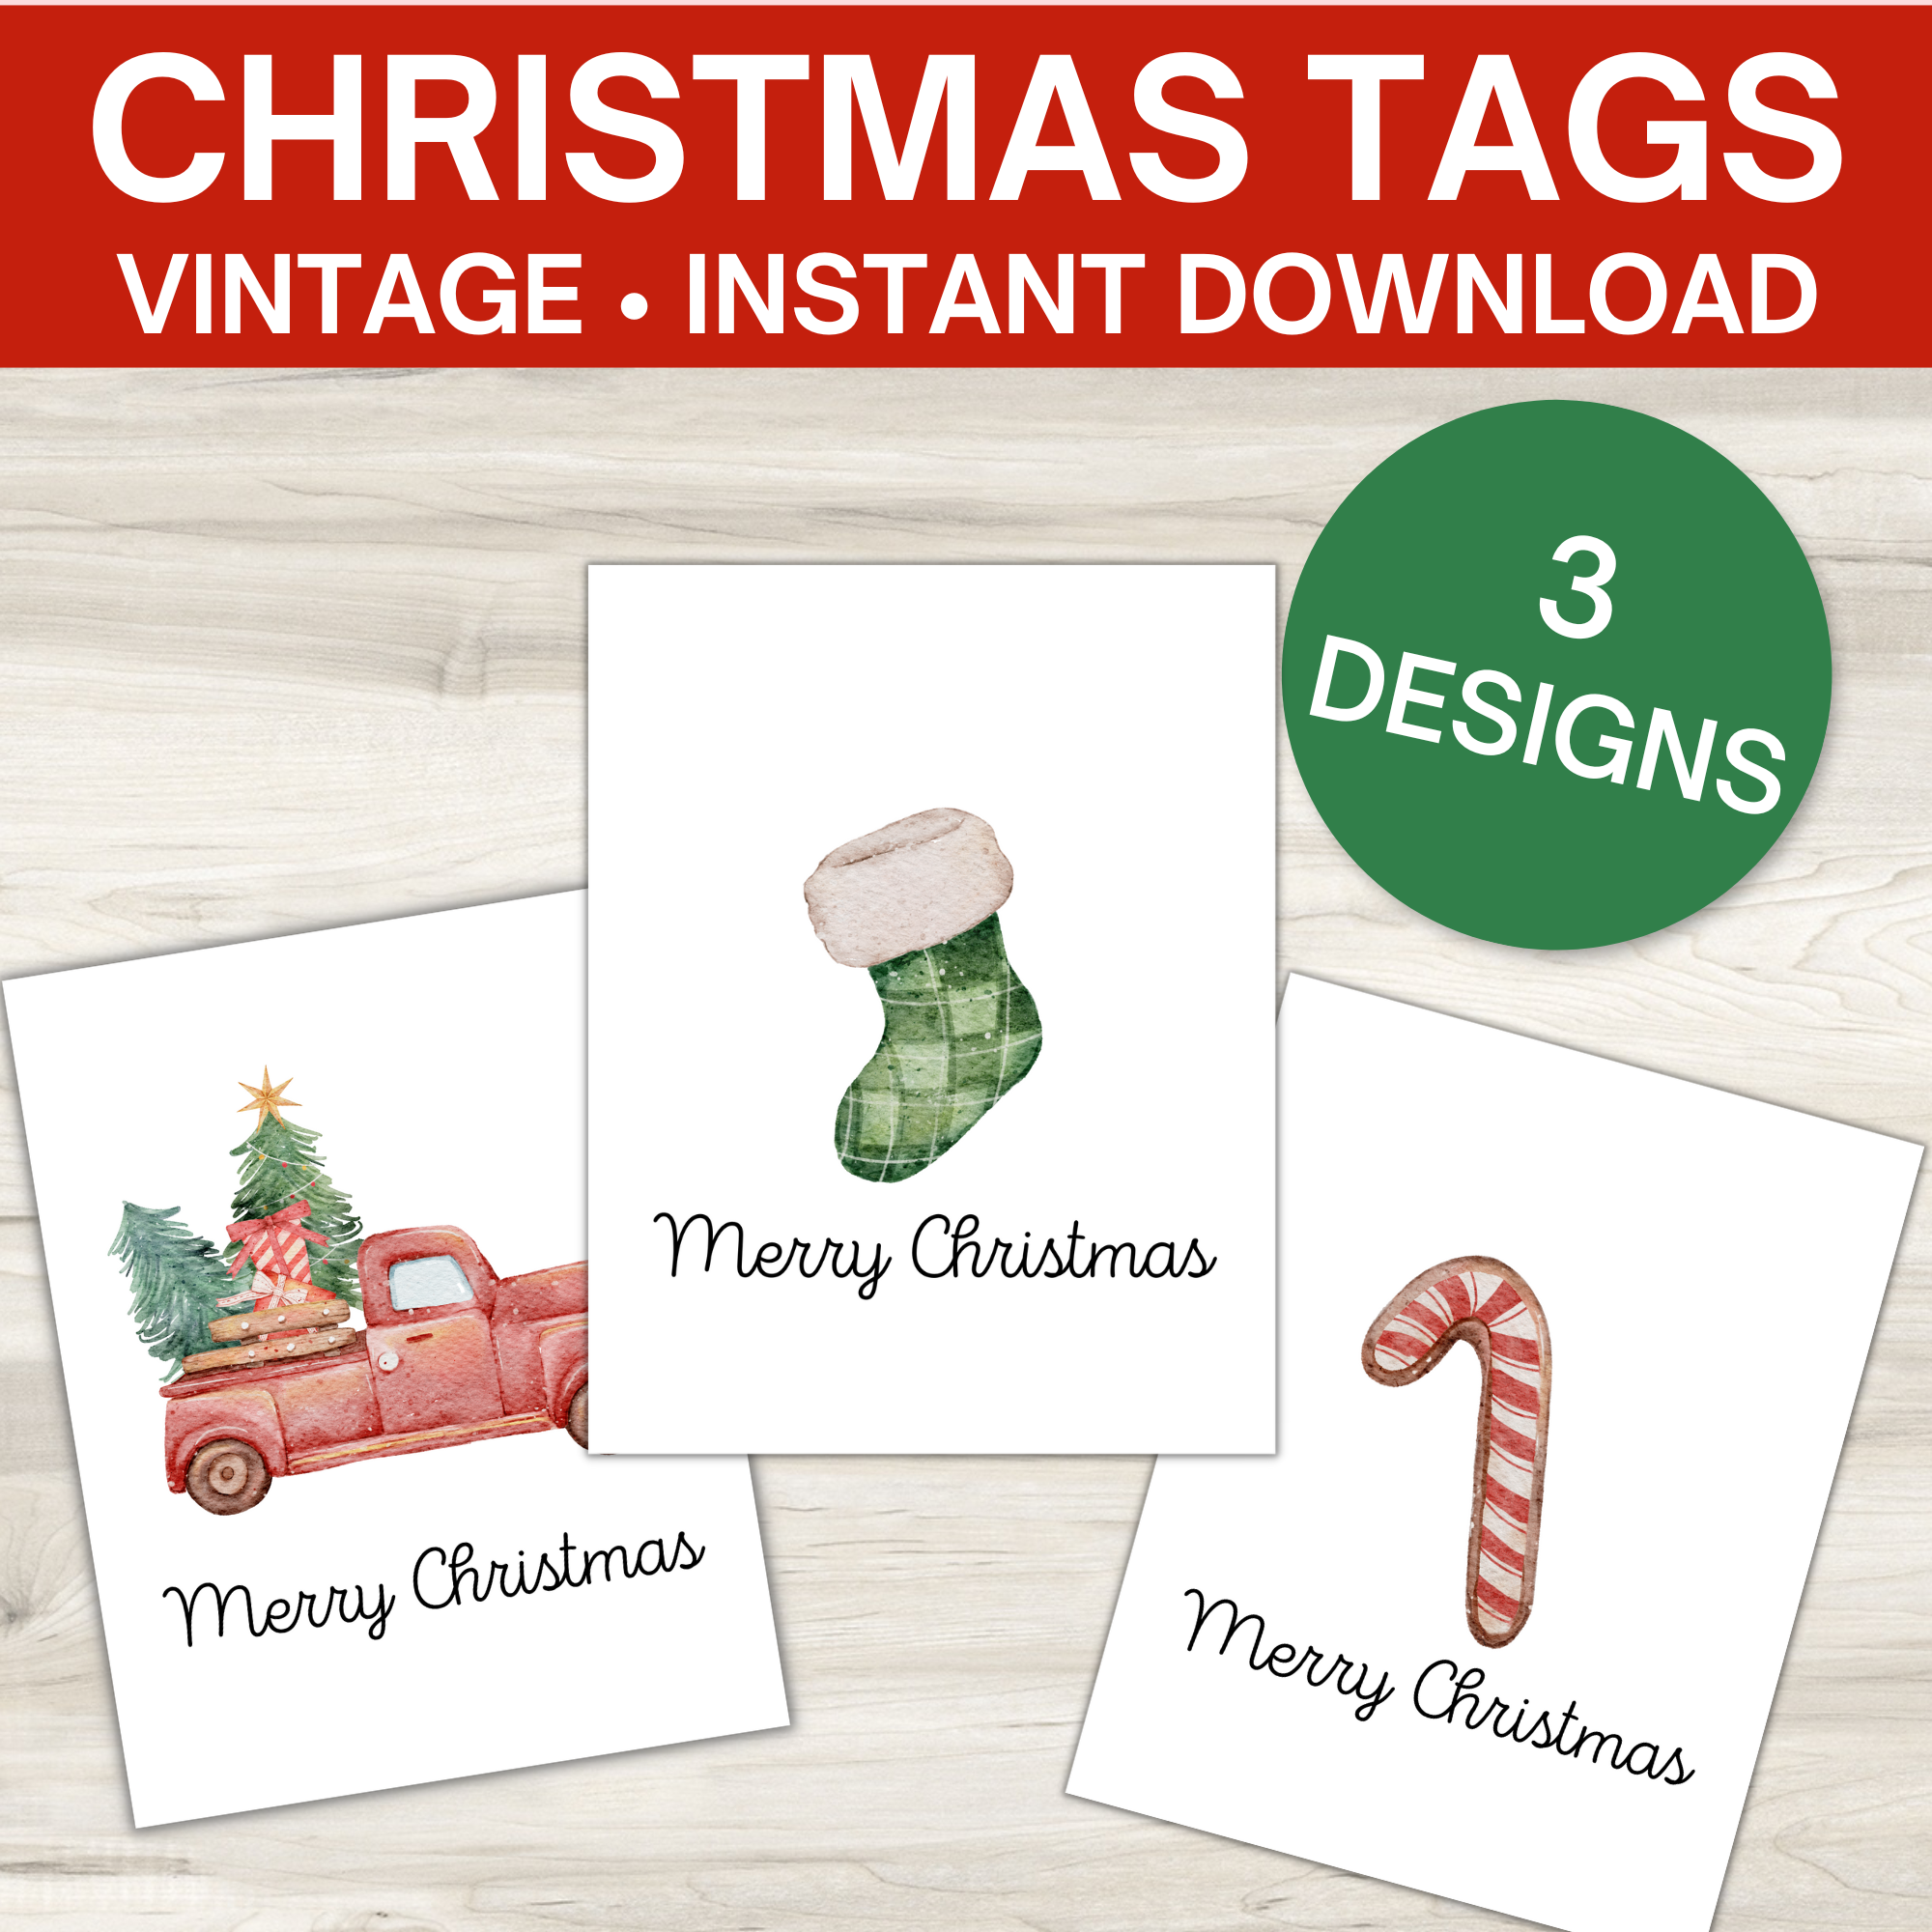 Vintage Merry Christmas Gift Tags - 3 designs – So Festive!